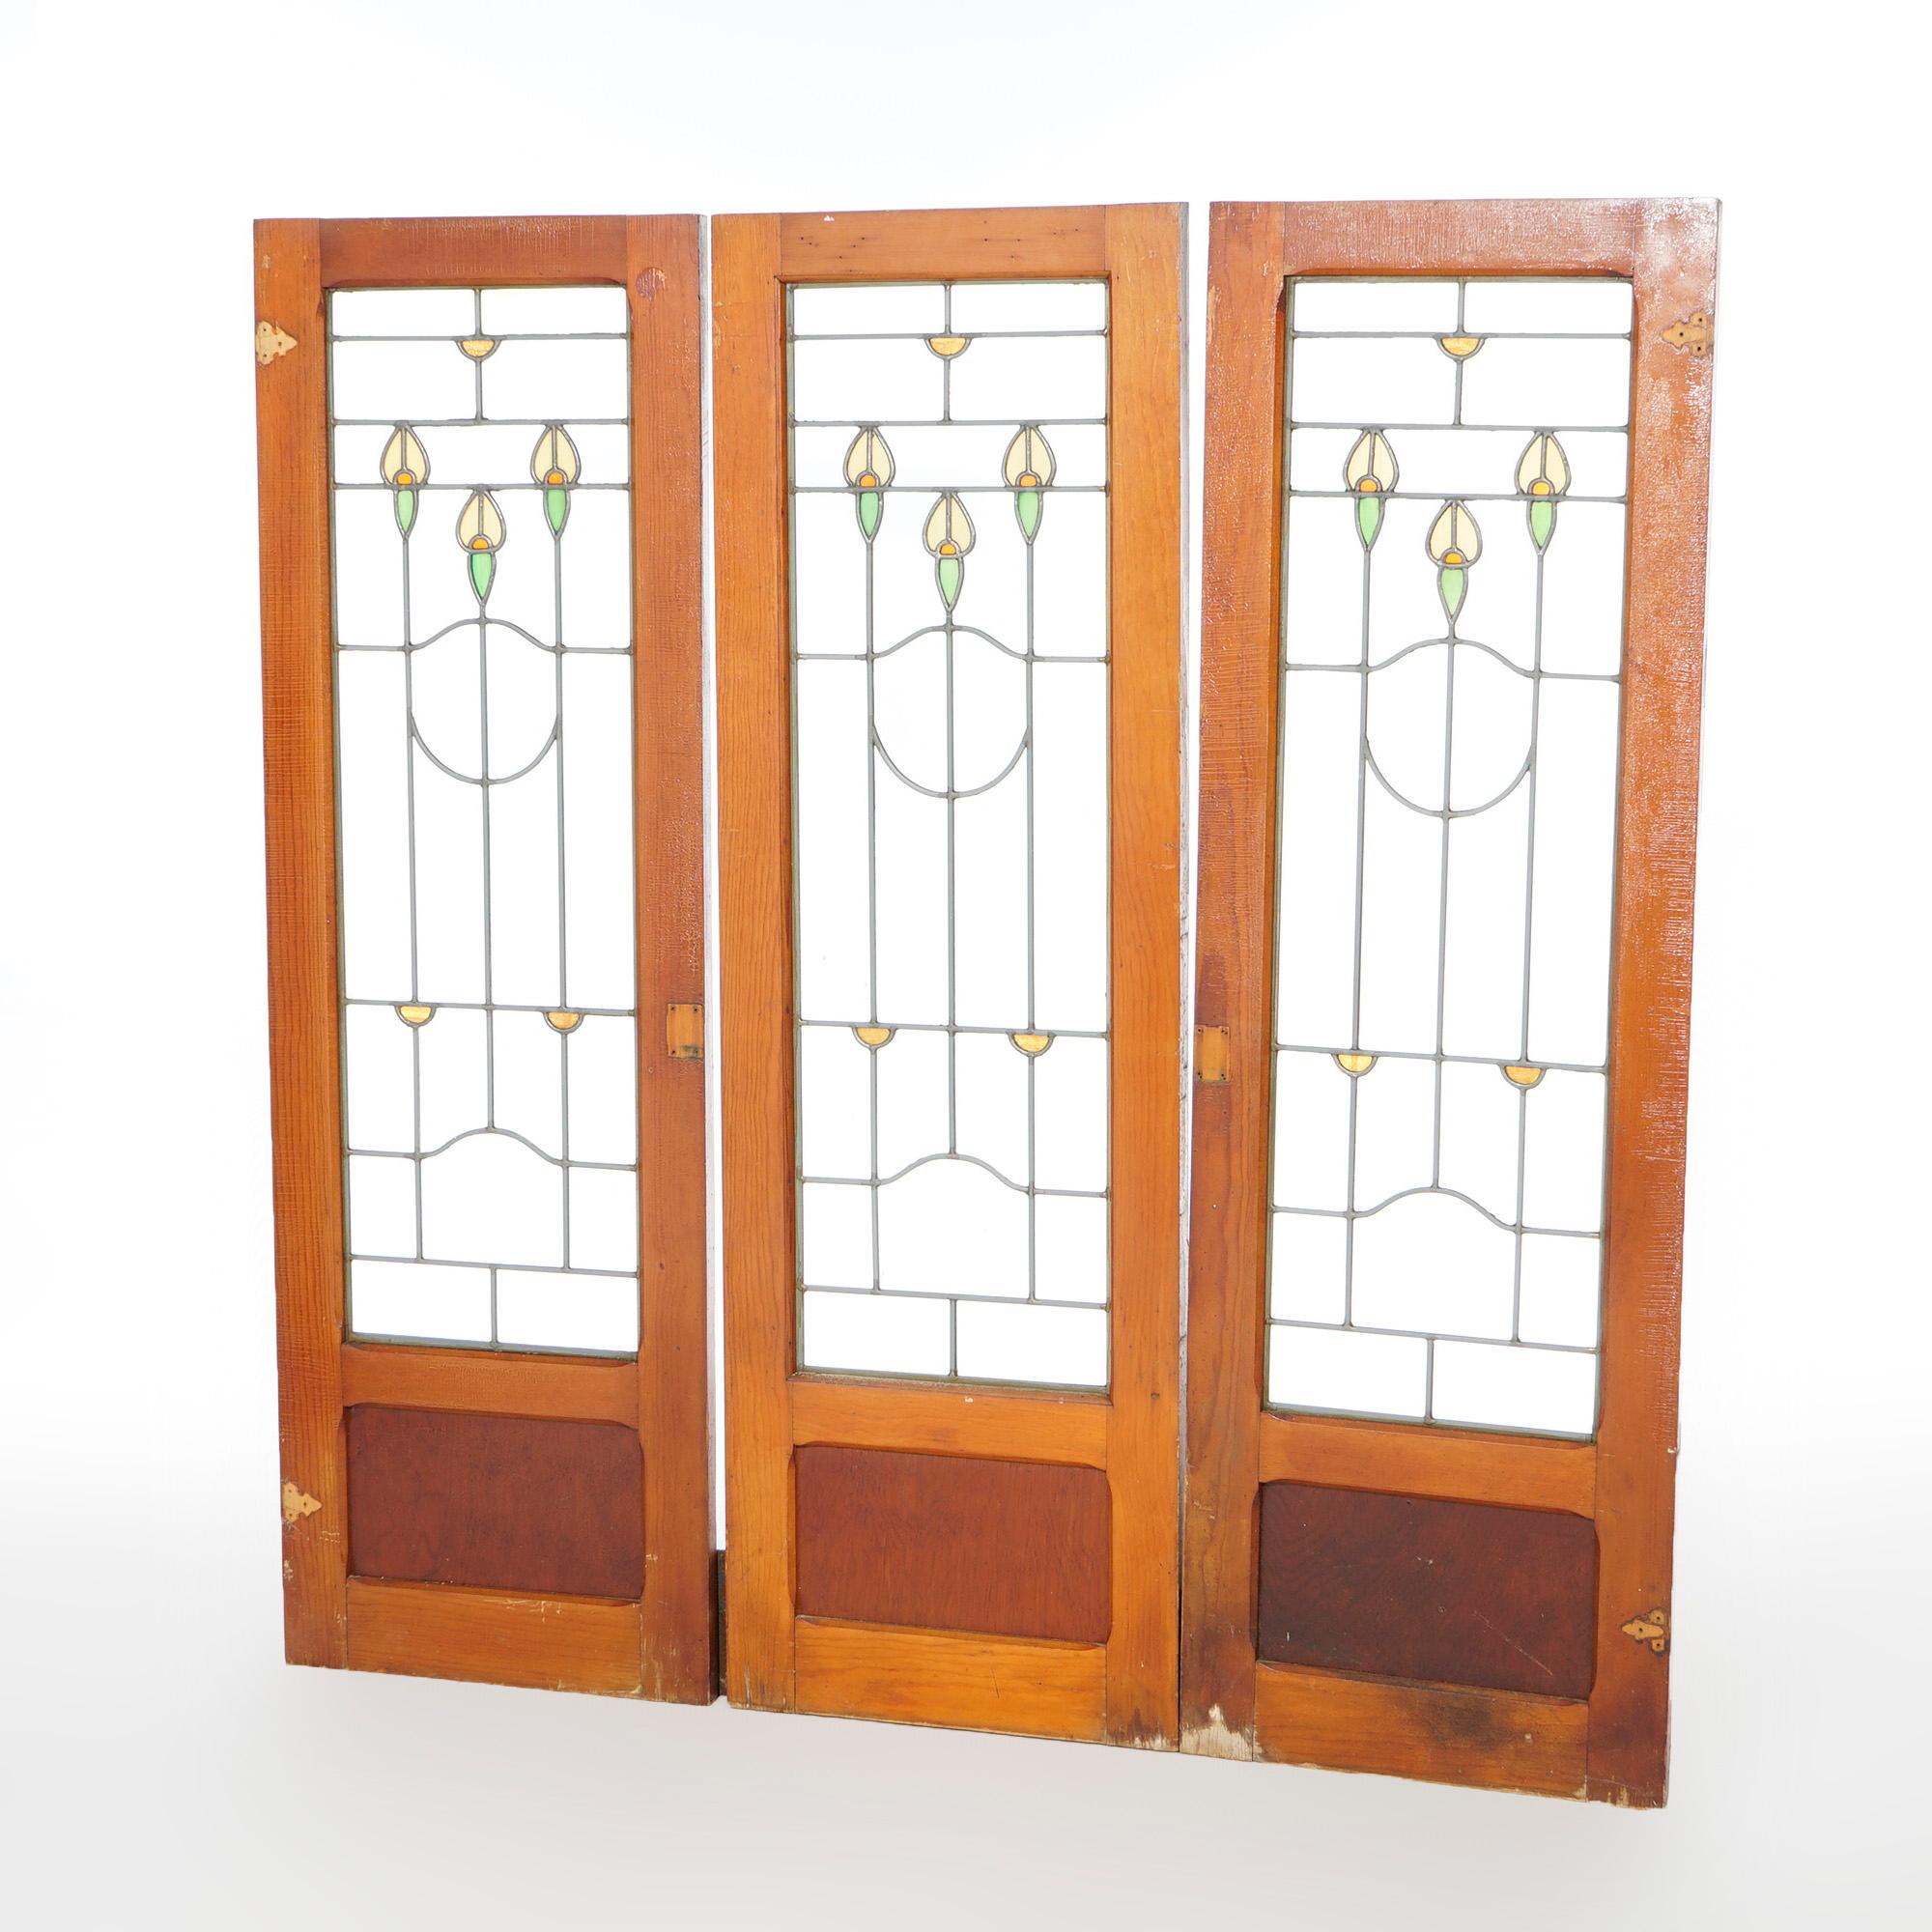 An antique set of three Arts and Crafts Prairie School leaded glass windows offer stylized floral elements, seated in wood window frame sashes, c1910

Measures- 58''H x 18.5''W x 1.25''D

*Ask about DISCOUNTED DELIVERY rates within 1,500 miles of NY*